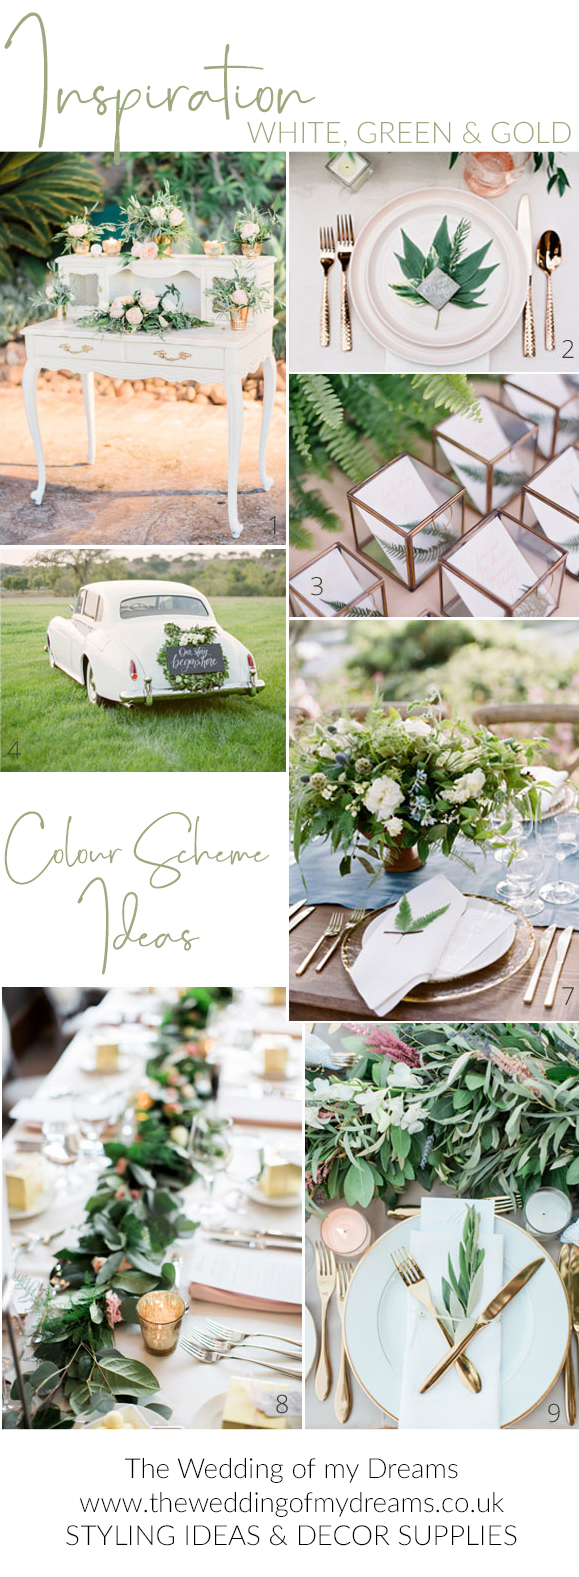 White-Green-and-Gold-Wedding-Inspiration-Board-put-together-by-@theweddingomd